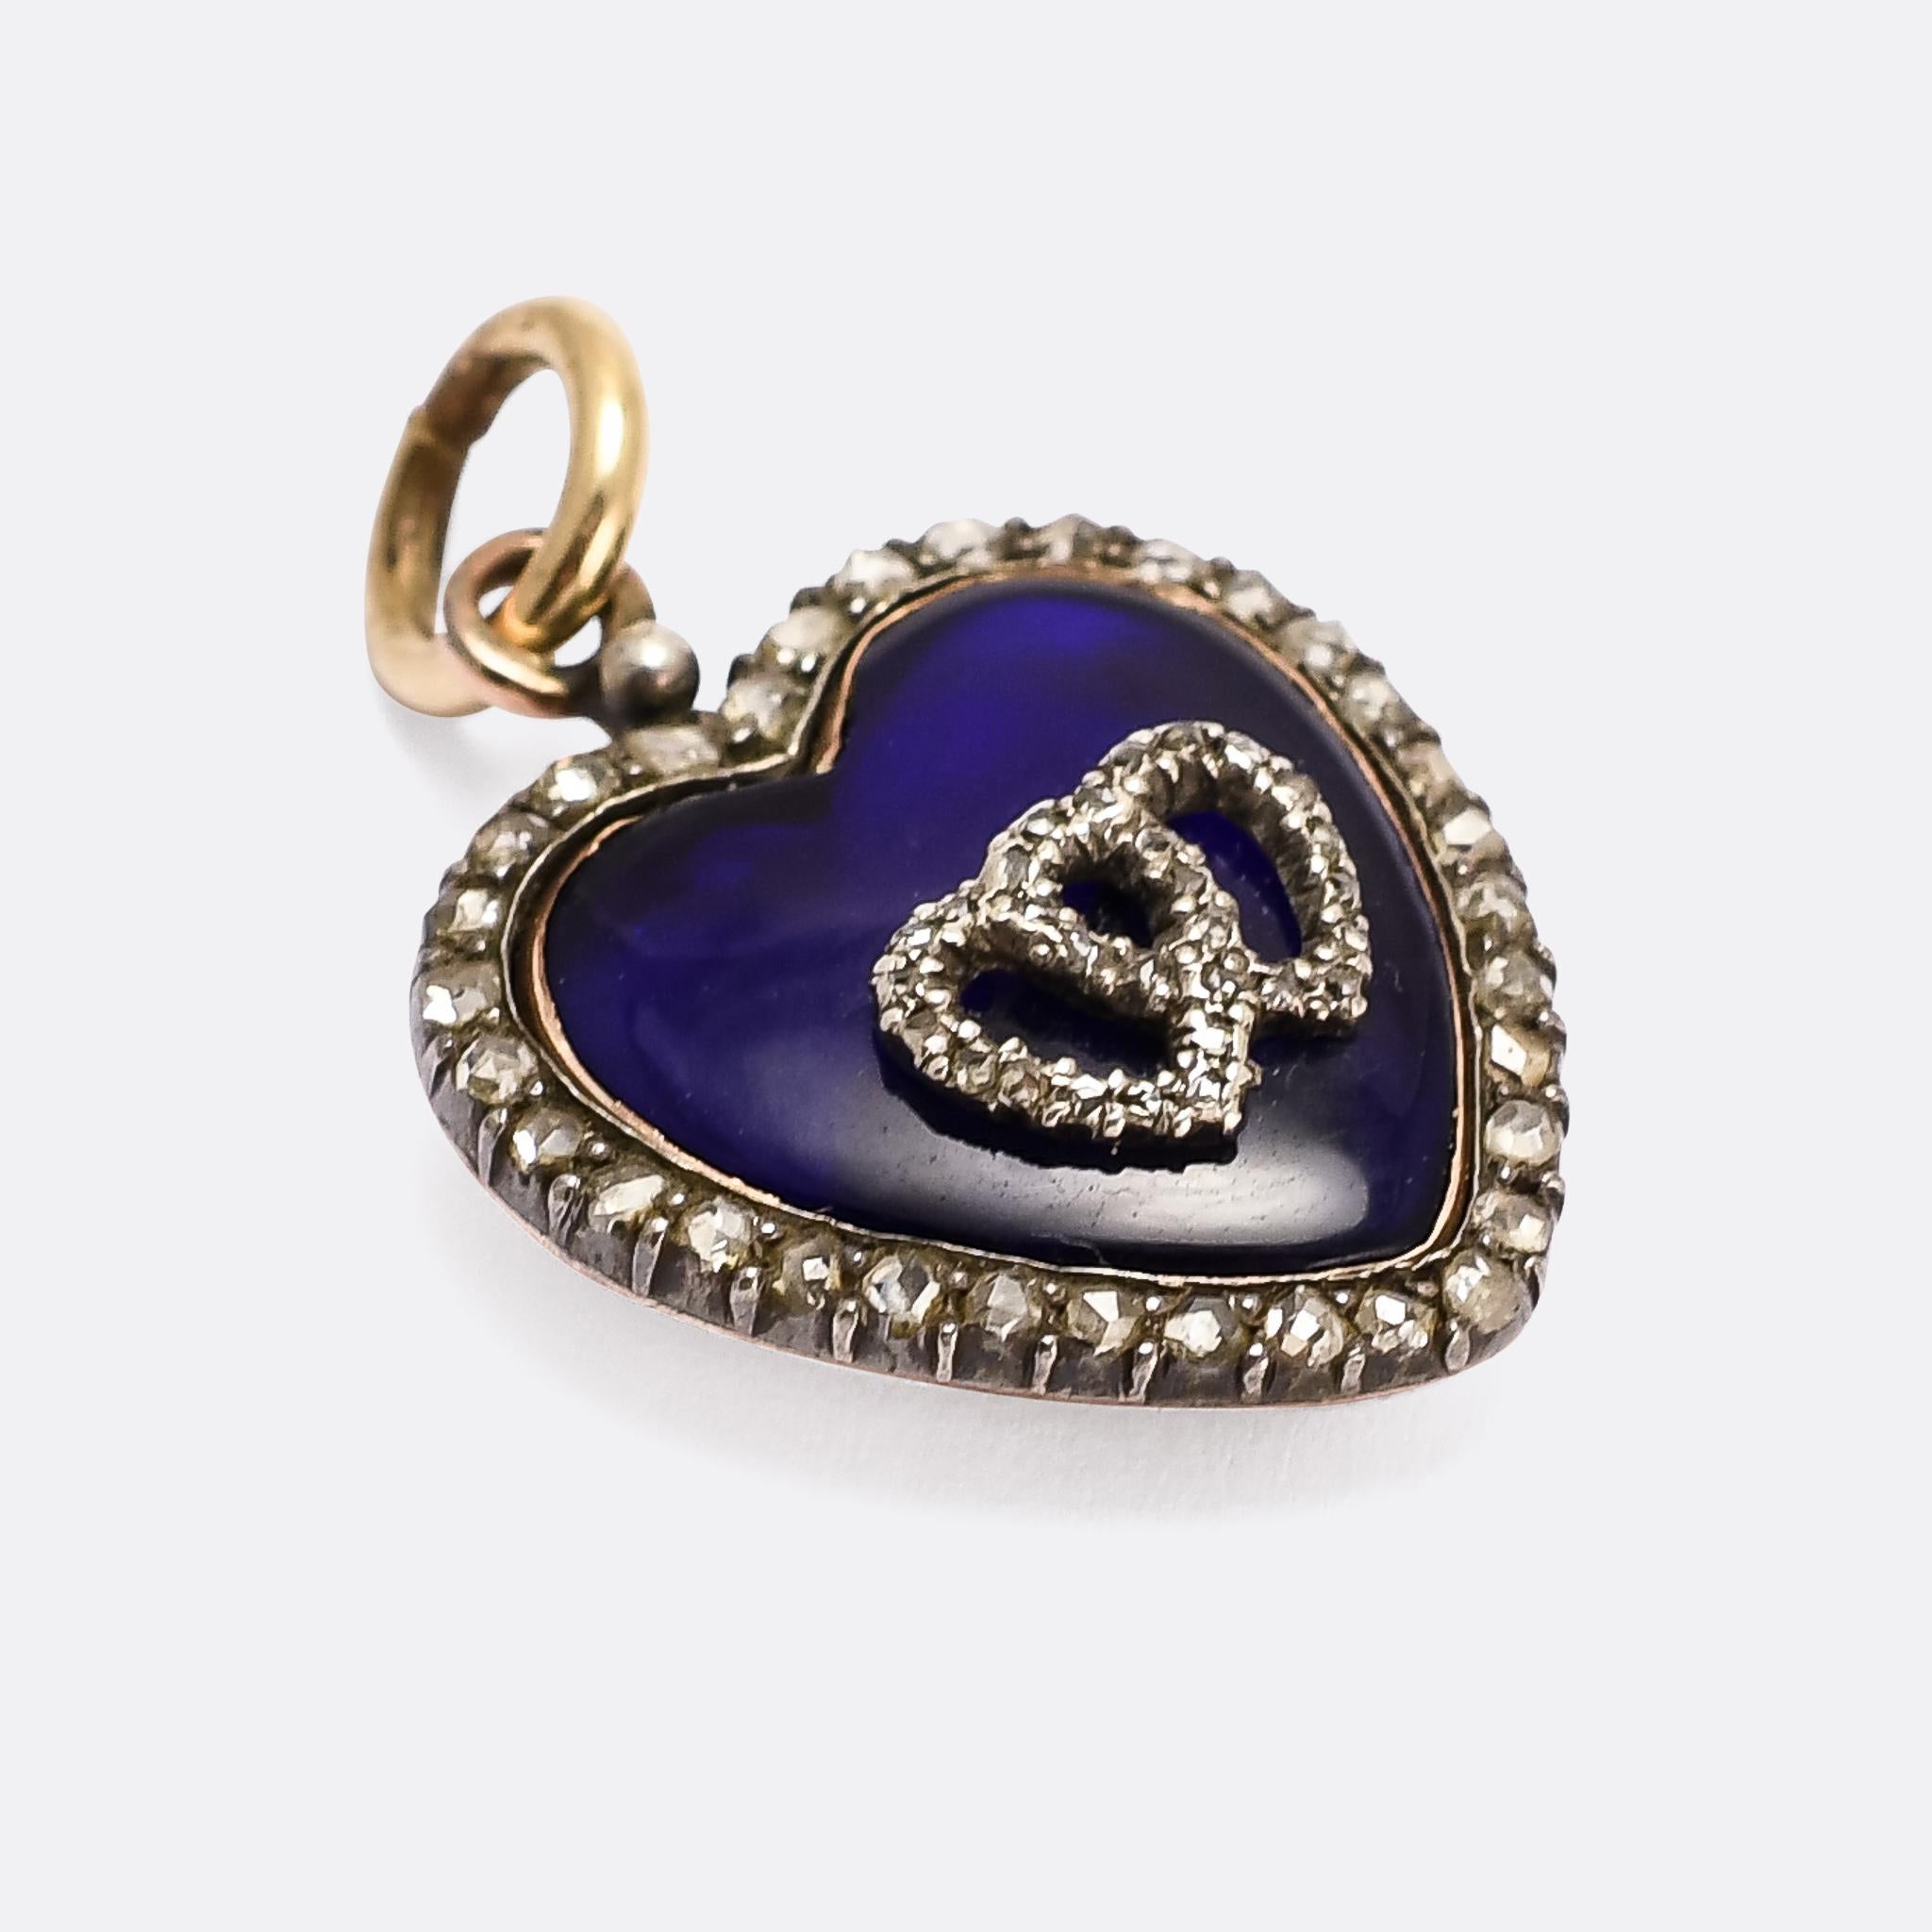 A sublime early Victorian heart pendant finished in vitreous blue enamel and emblazoned with an interlocked double heart motif. It was made around 1840, with rose cut diamonds set into the border as well as the double heart. Crafted in 15 karat gold